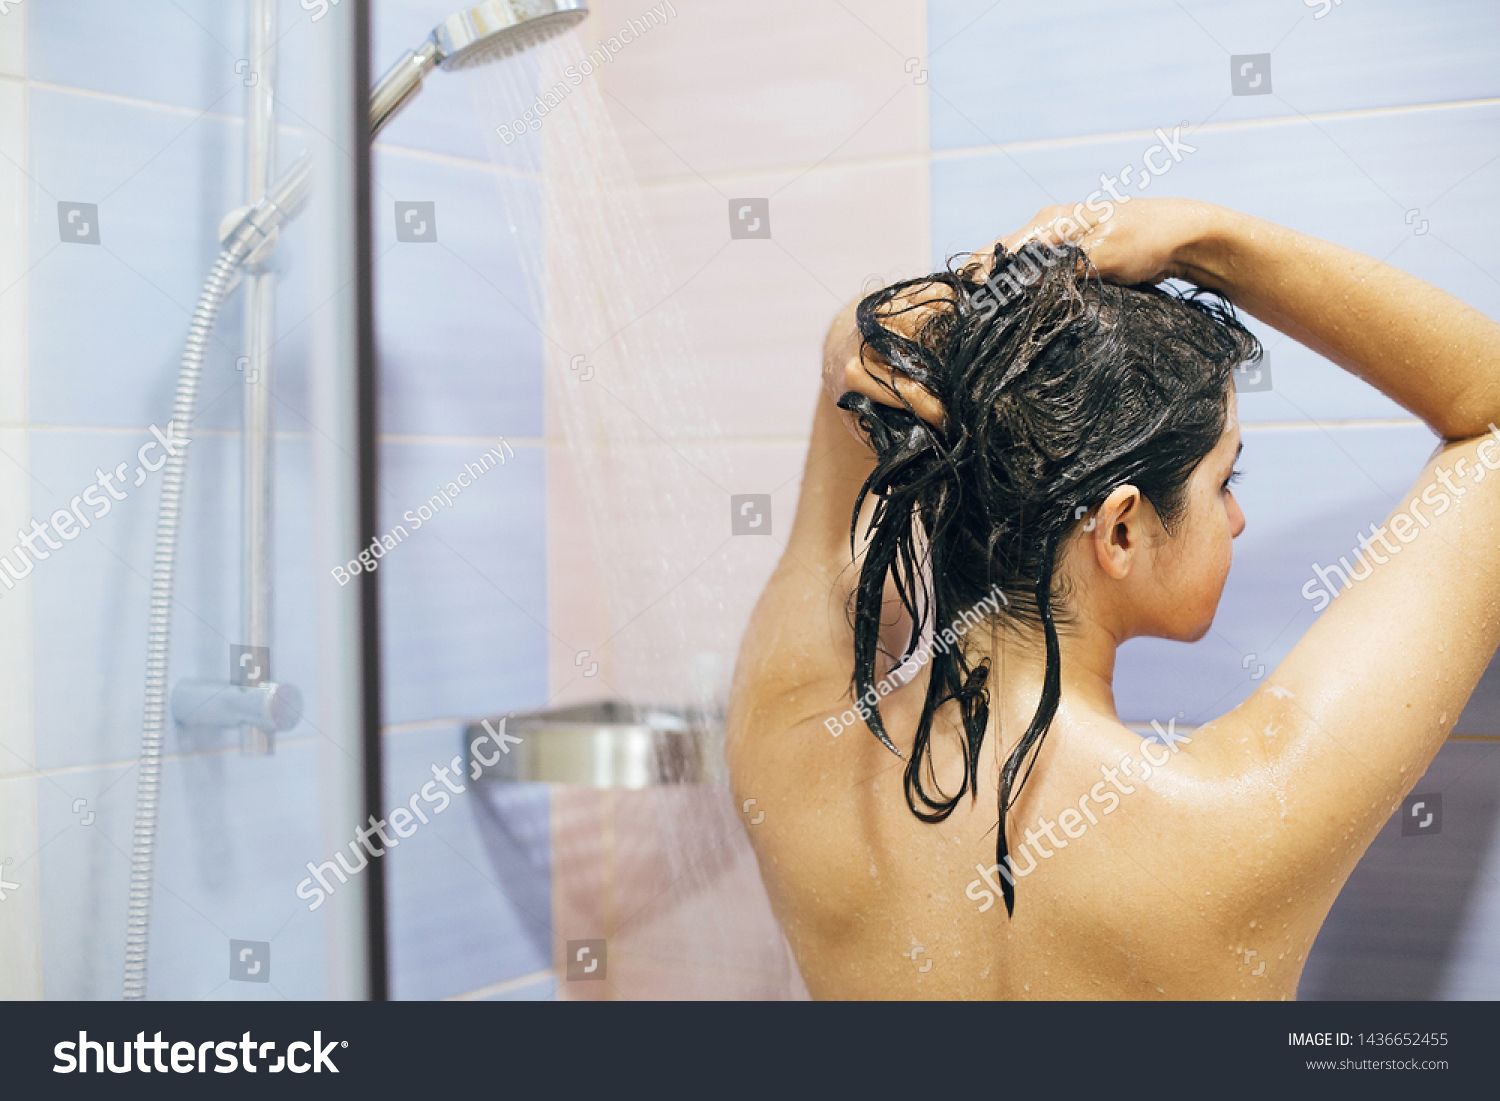 Hot Girls In The Shower